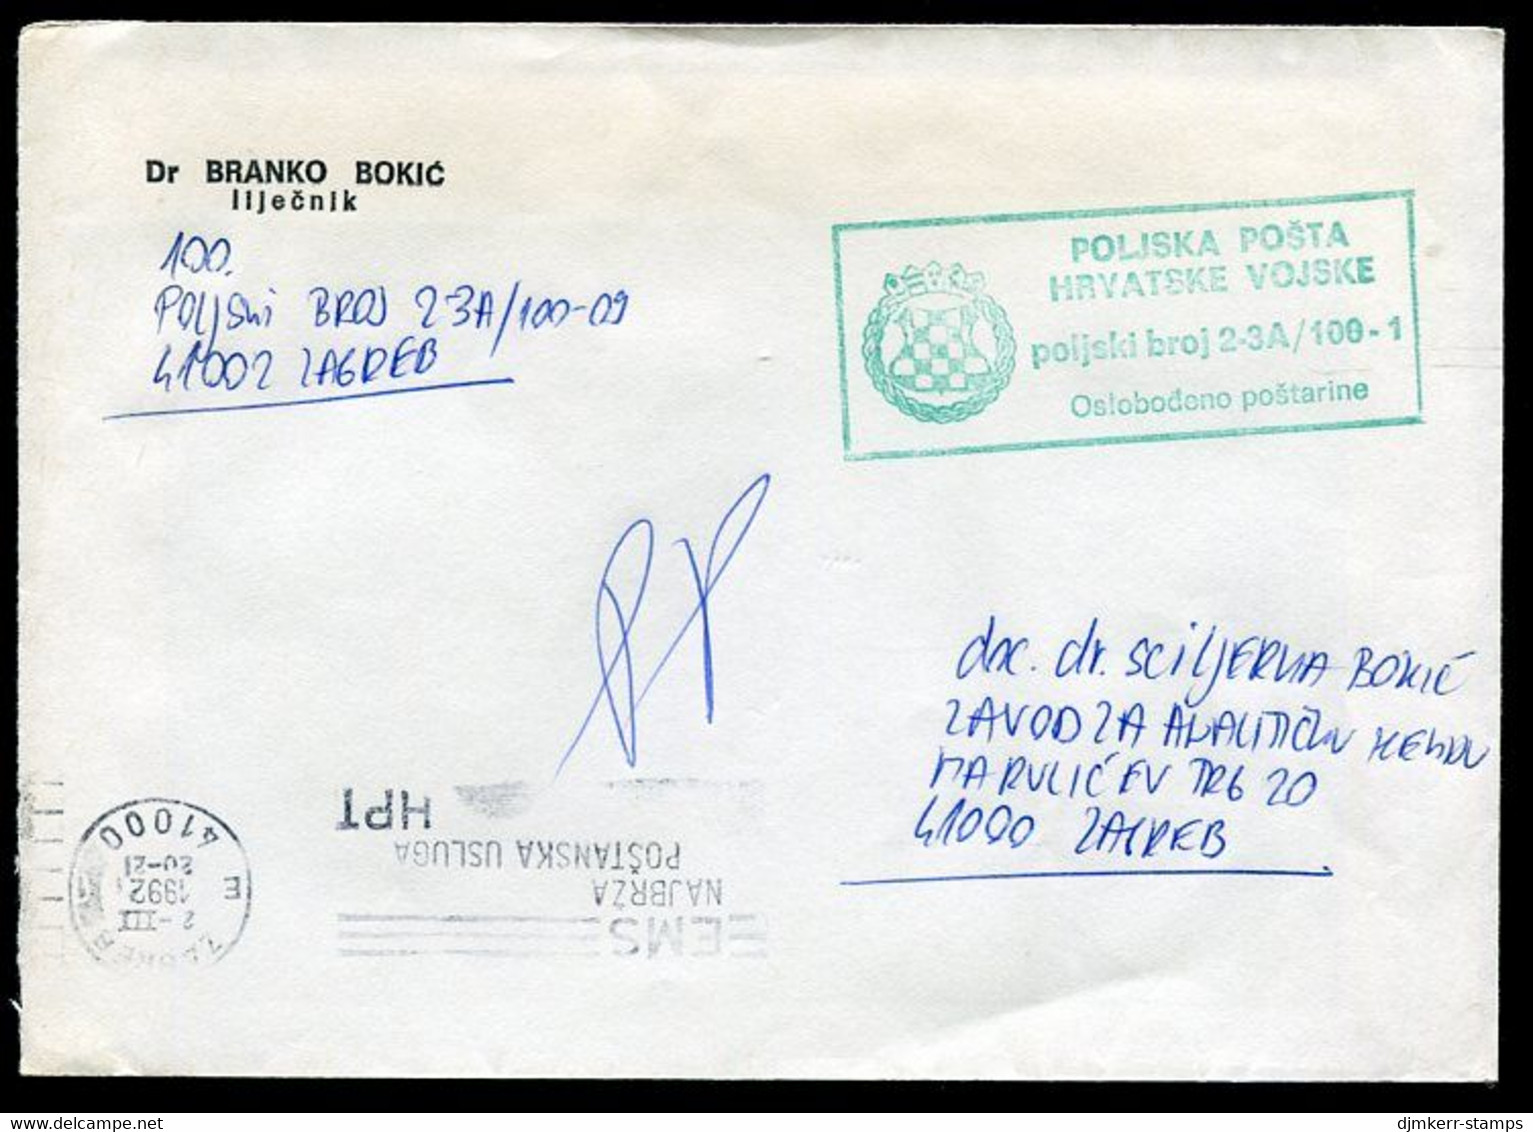 CROATIA 1992 Stampless Cover With Field Post Office Cachet Sent During War With Serbia. - Croatia